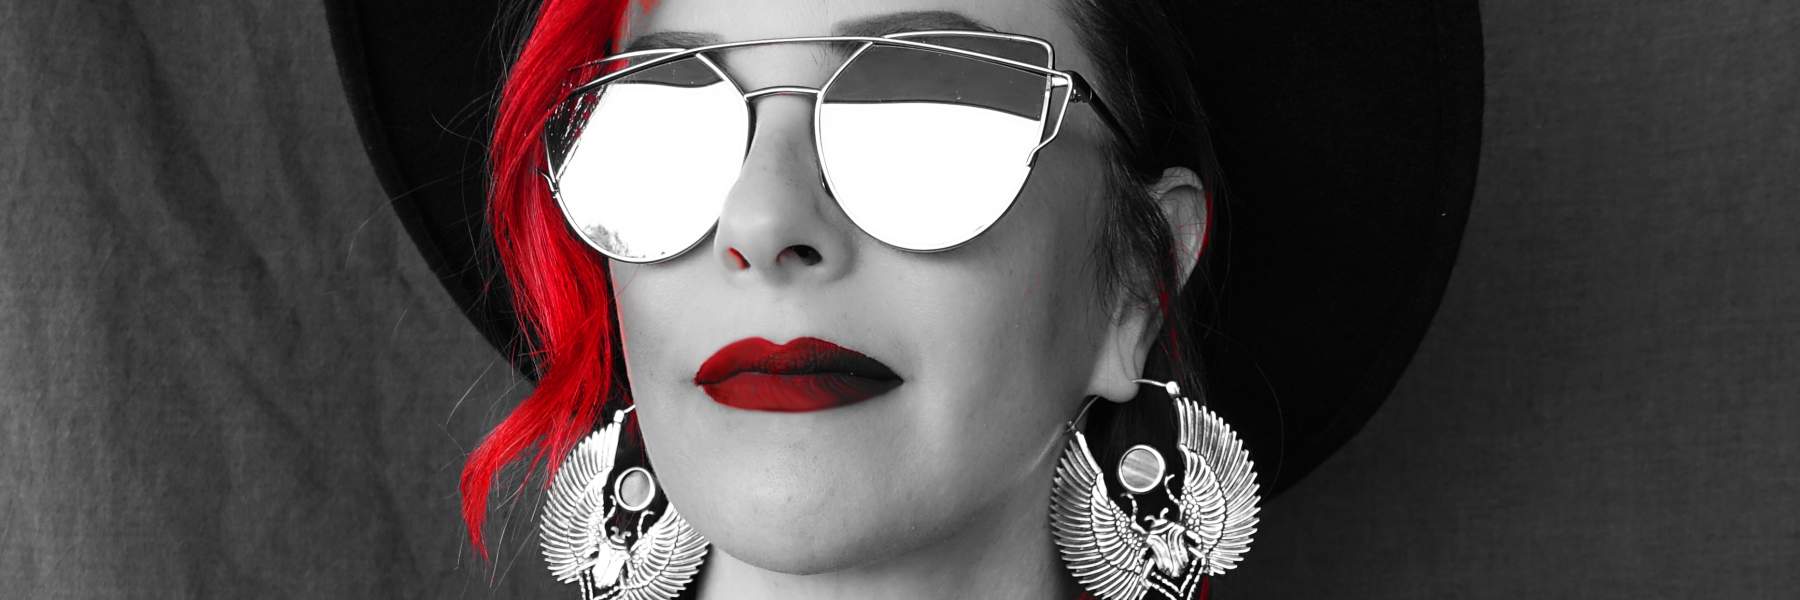 Kristen Solury with red hear and lipstick, wearing reflective sunglasses